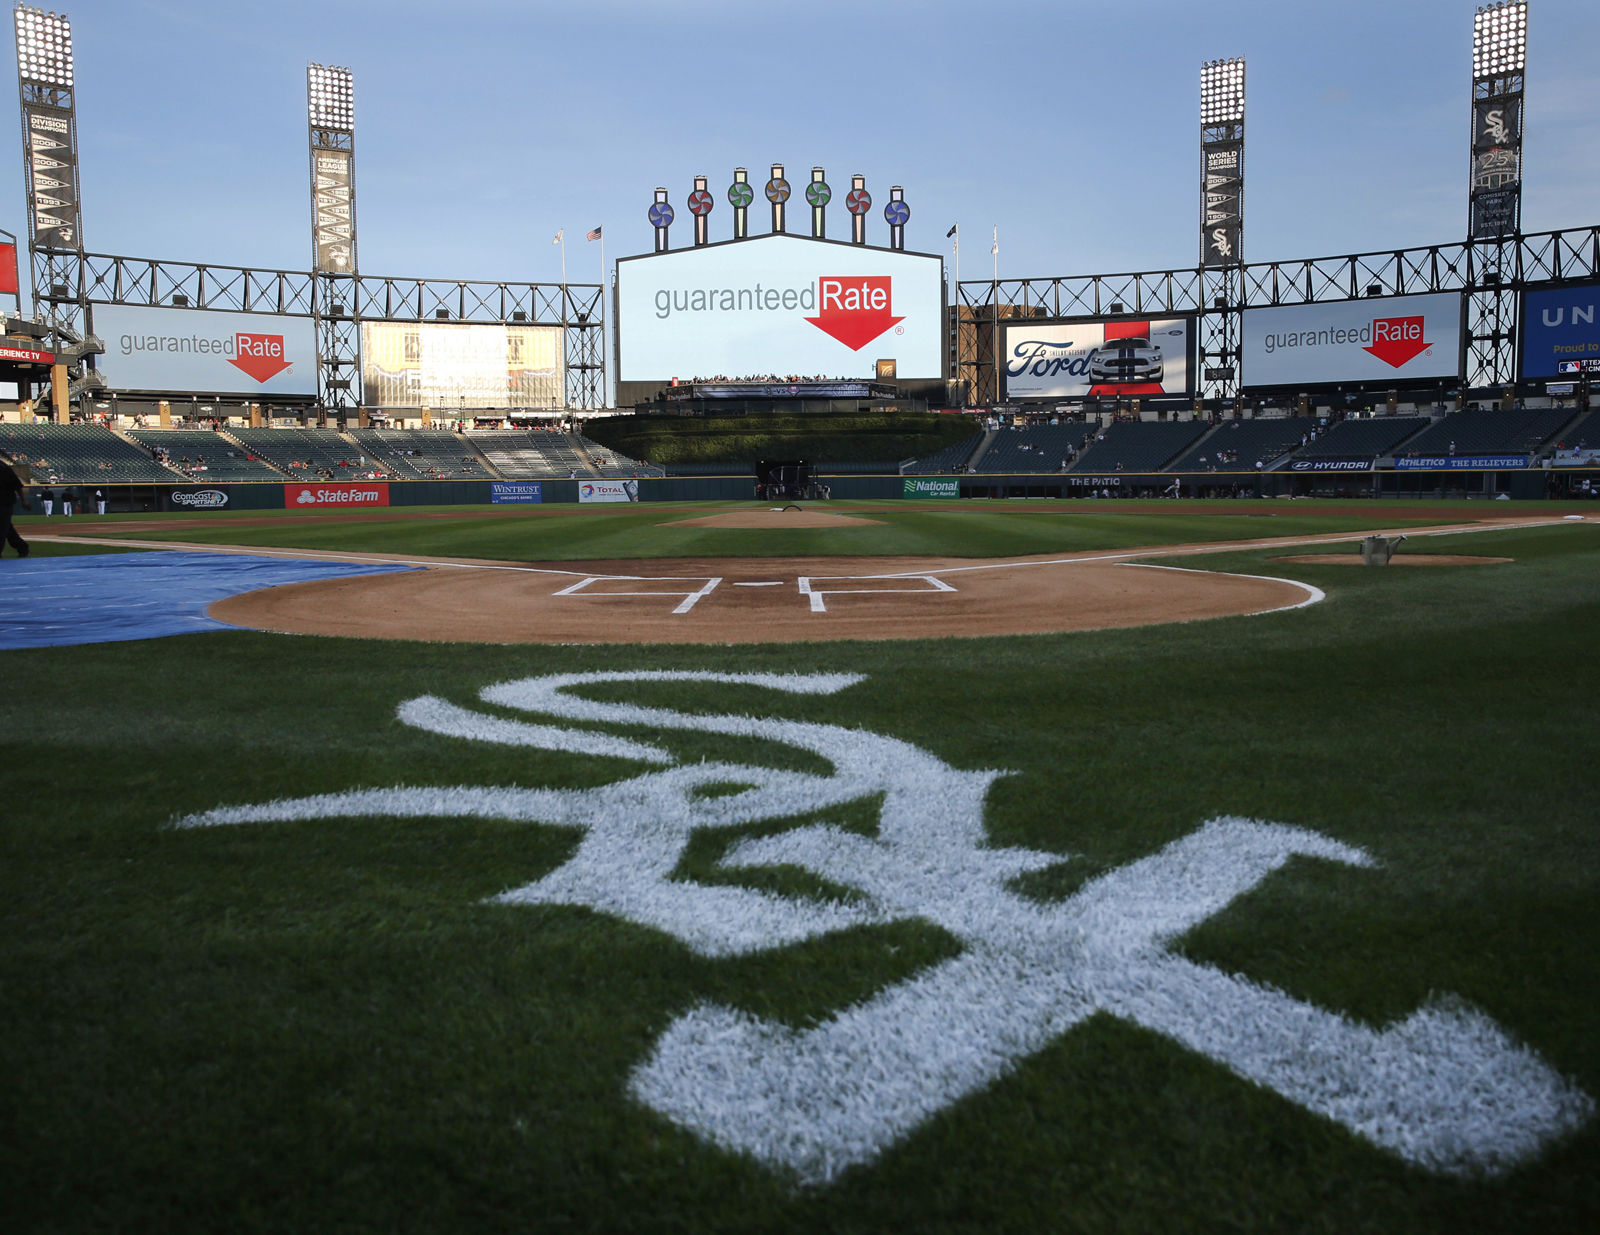 Guaranteed Rate Field, formerly known as U.S. Cellular Field and before that known as "new" Comiskey Park, comes in at No. 21. It costs $62.33 to see the Chicago White Sox at home. File. (AP Photo/Charles Rex Arbogast)